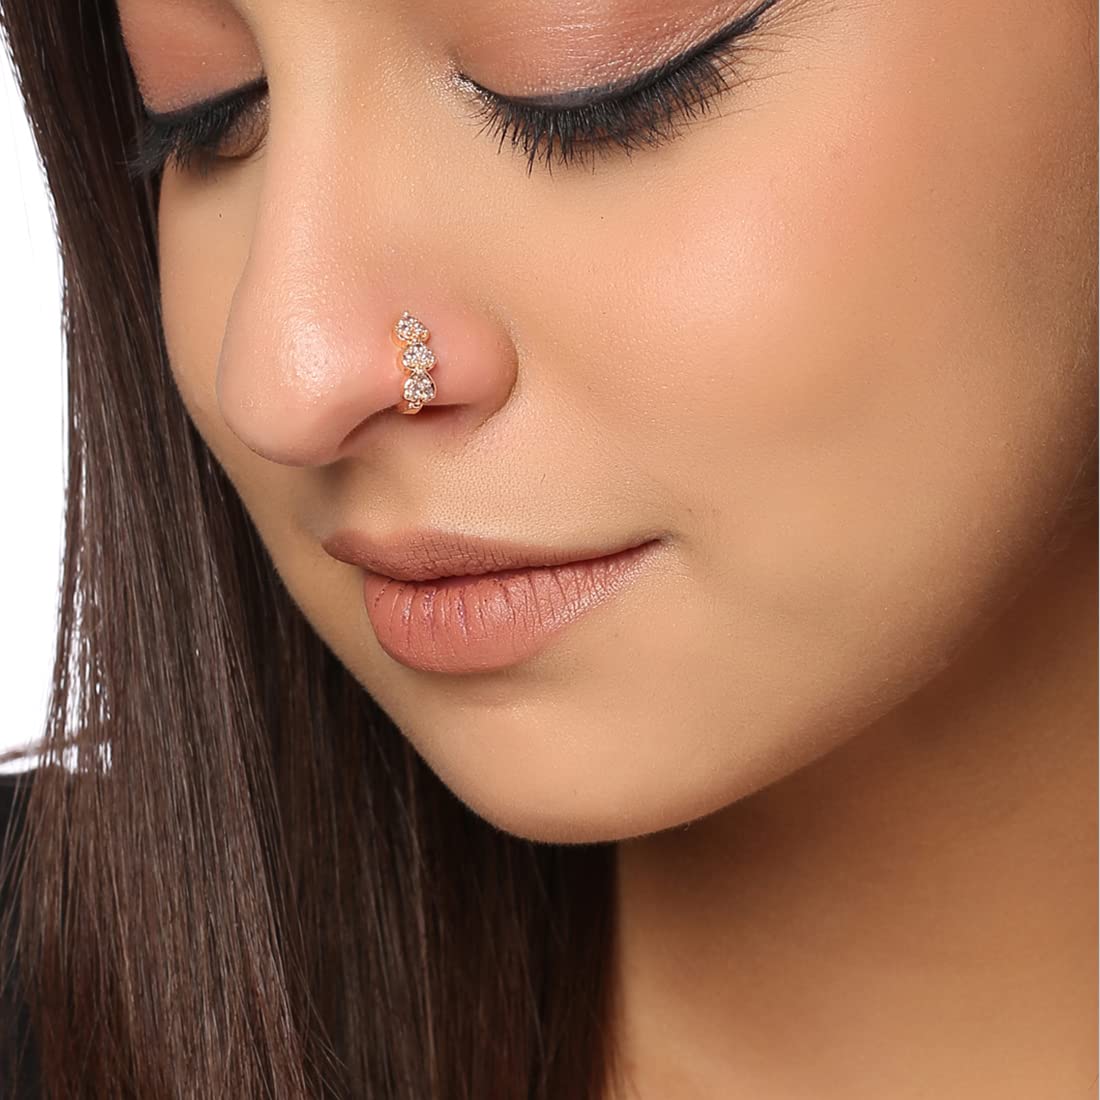 Buy Nose Ring Gold Plated Nose Ring (Bali) For Women Women Girls, GOLD-NOSE- PIN-SET2 Online - Get 64% Off